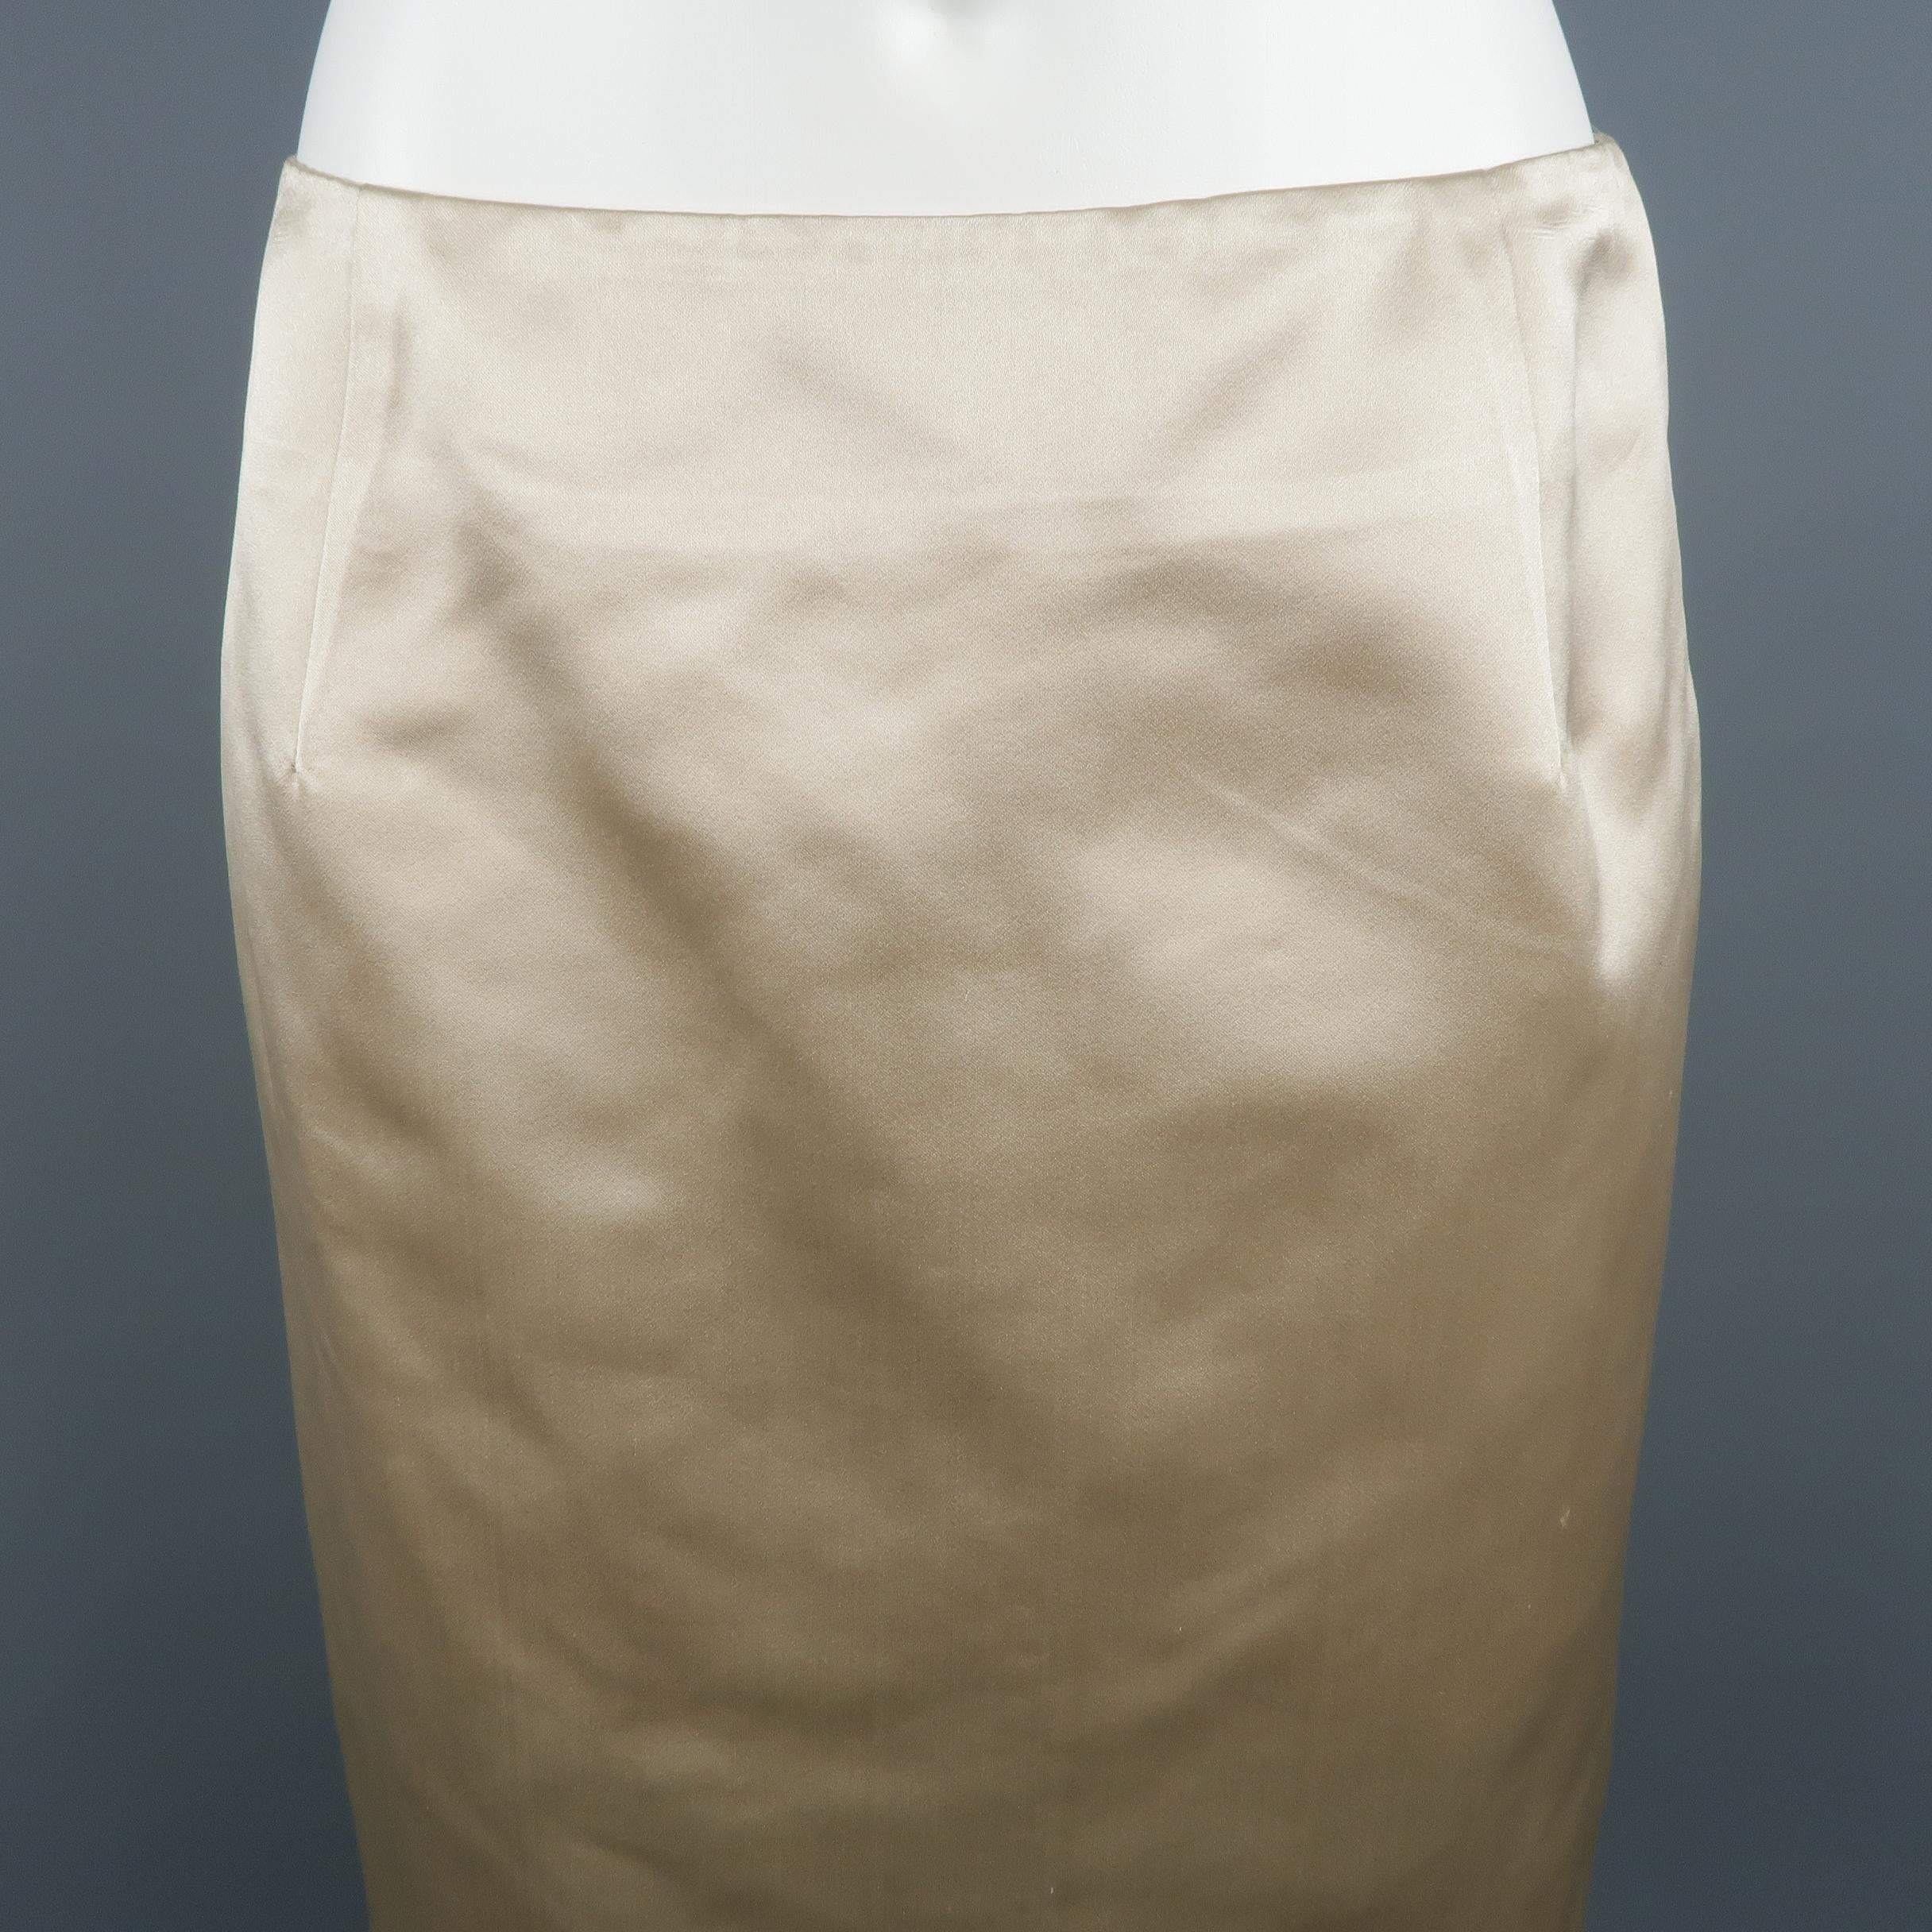 AKRIS classic A-line skirt, comes in a gold tone and silk material, knee-length, and zipper closure. Small signals of use.
 
Good Pre-Owned Condition.
Marked: 6 US
 
Measurements:
 
Waist: 28 in.
Hip: 38 in.
Length: 21.5 in